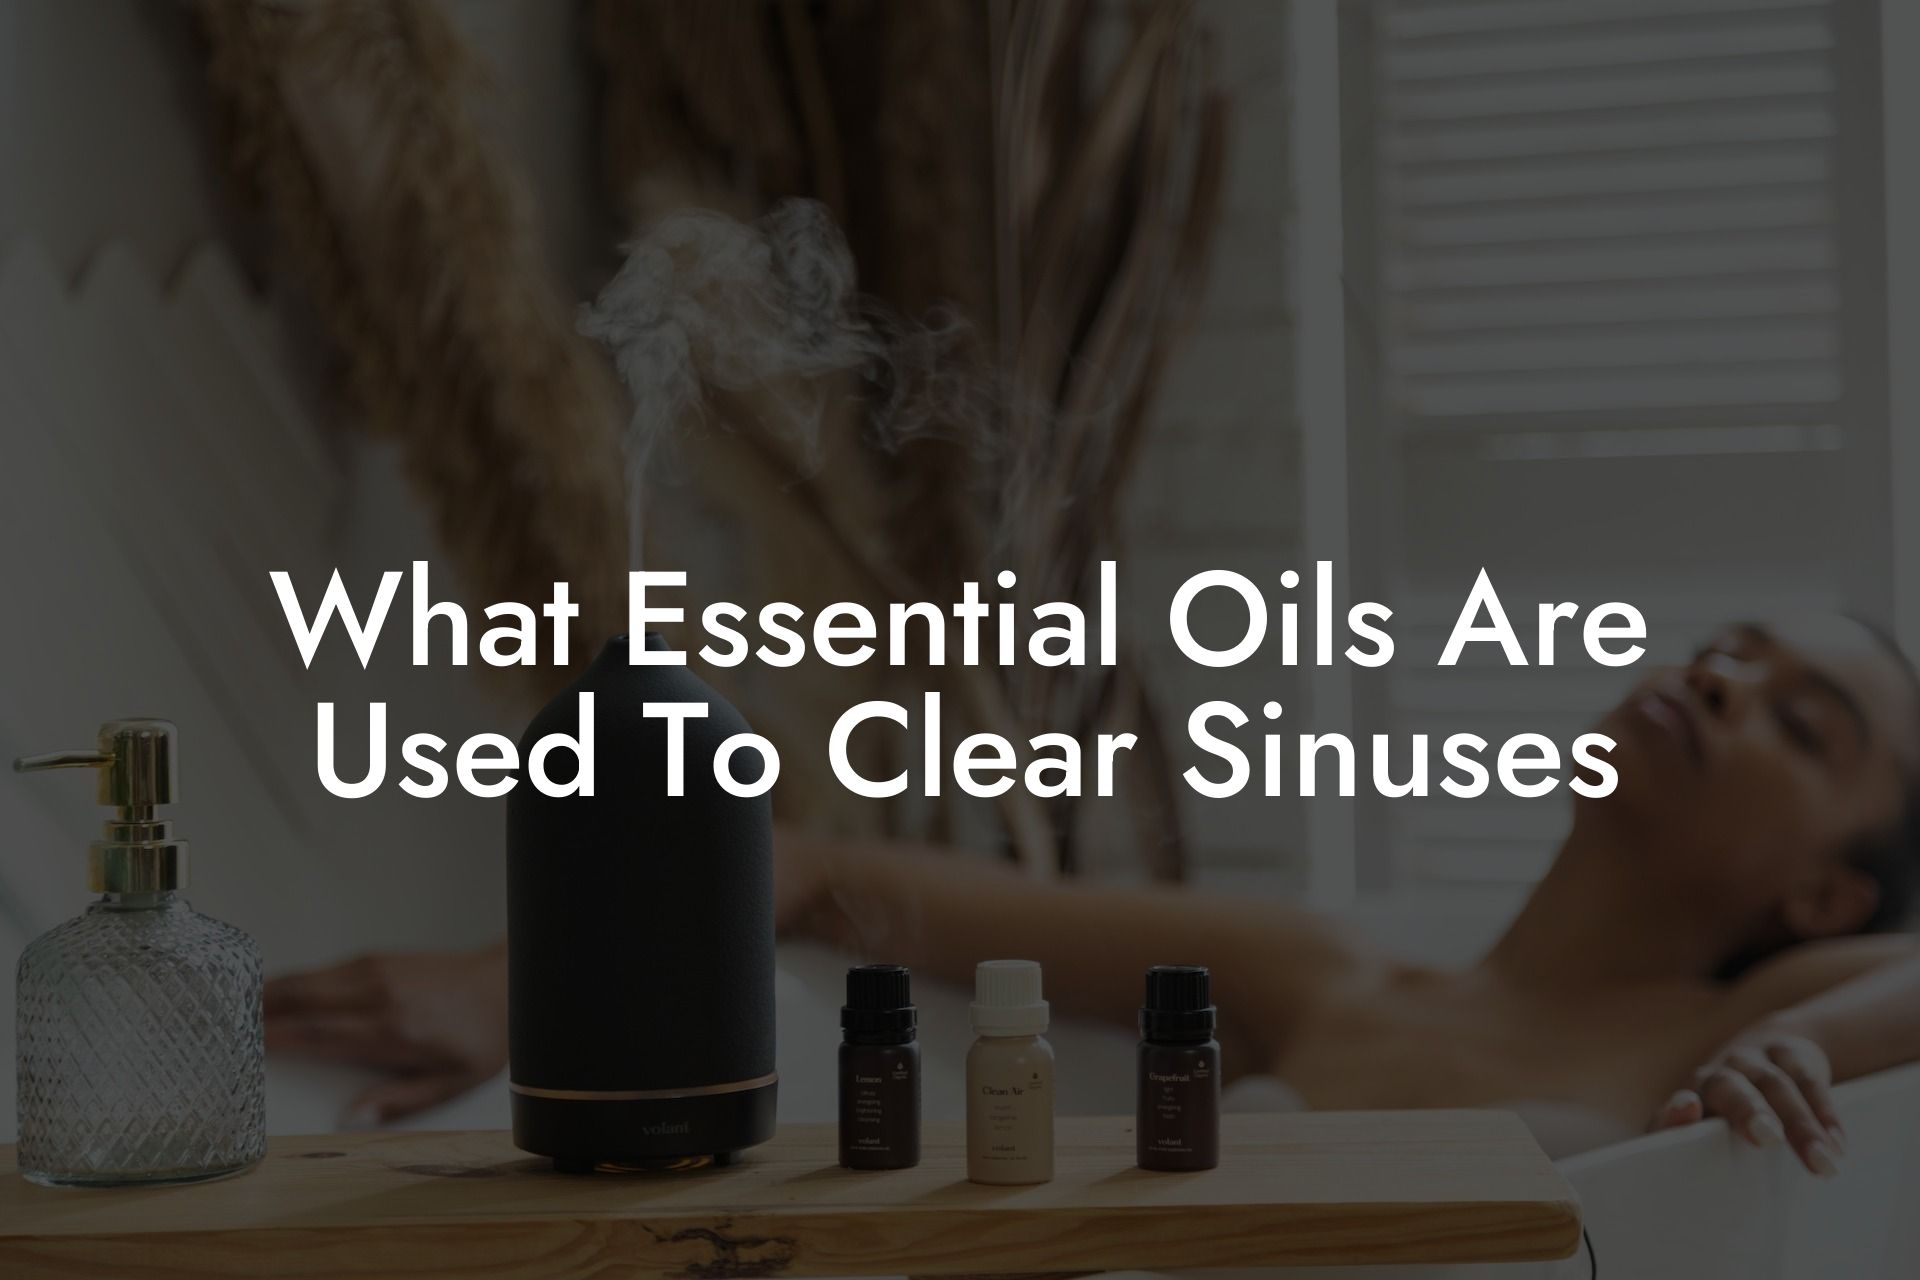 What Essential Oils Are Used To Clear Sinuses